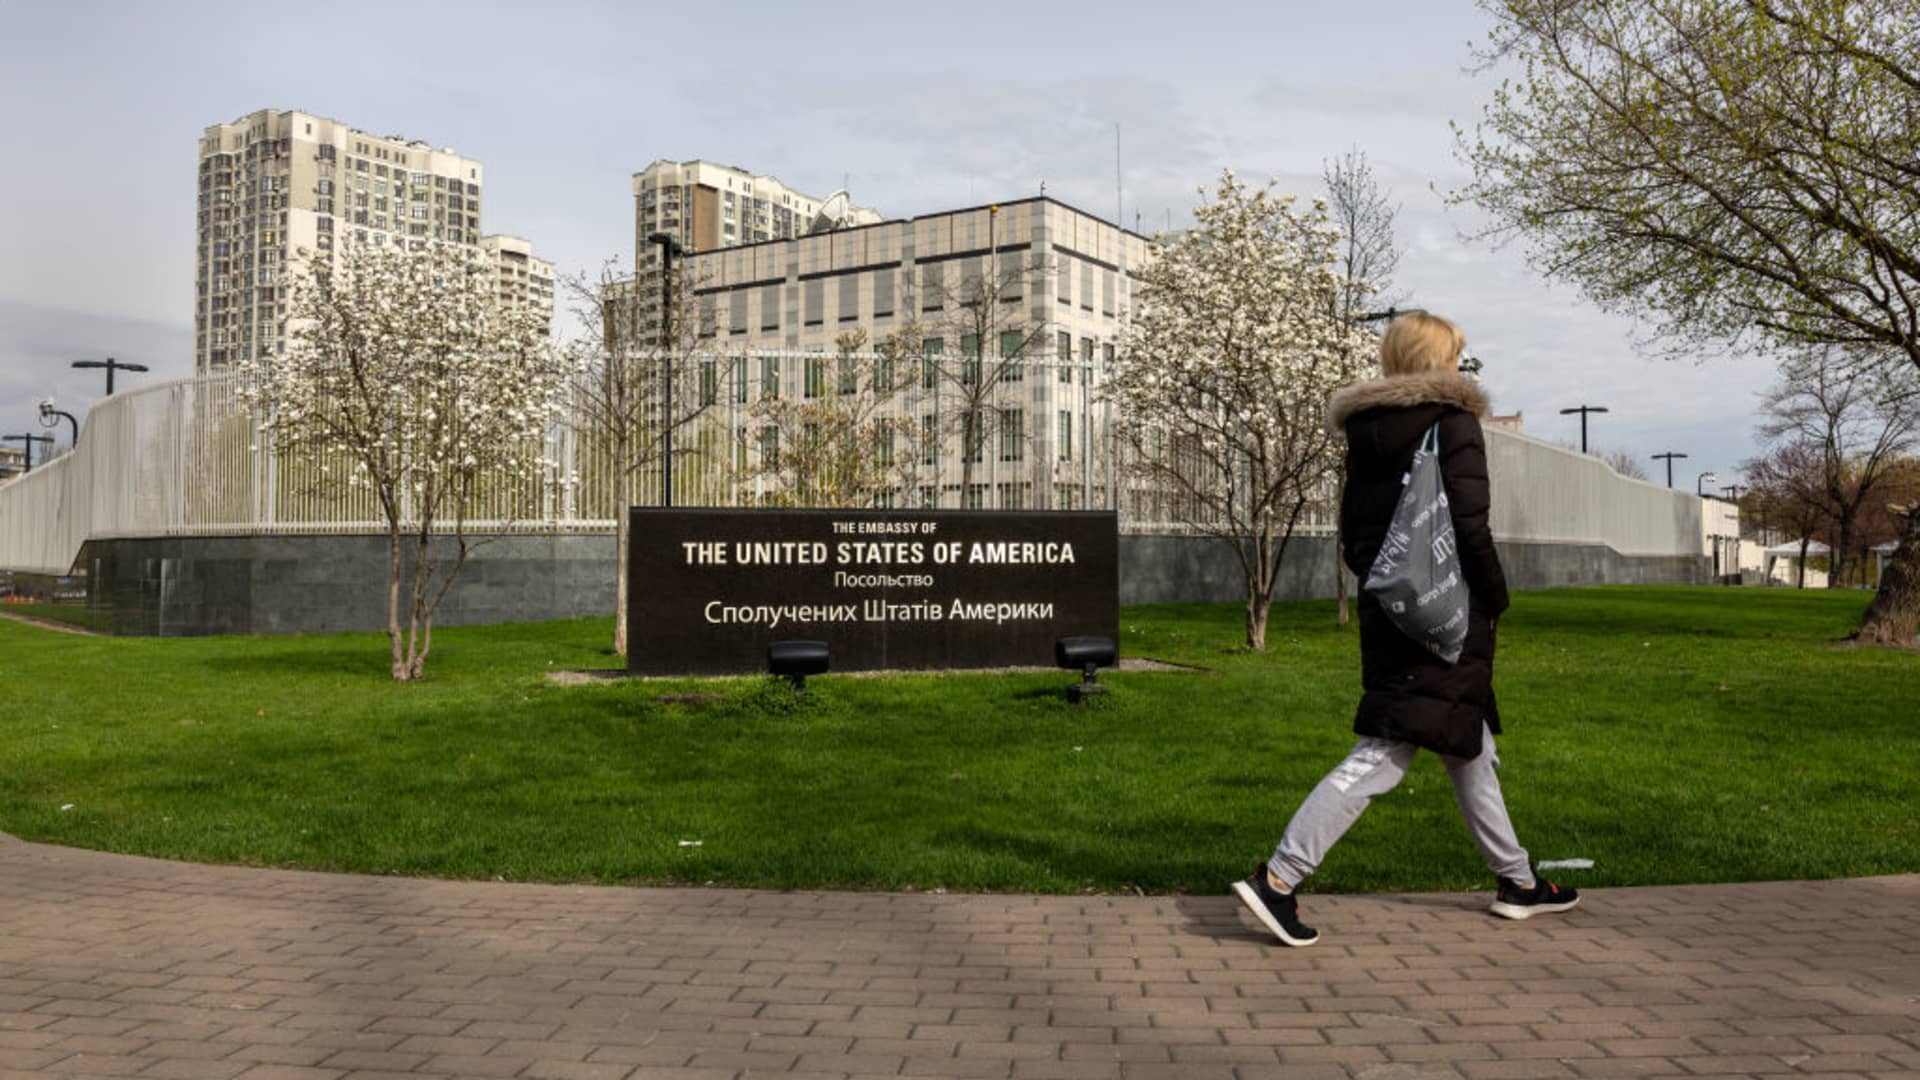 A woman walks past the closed United States Embassy to Ukraine on April 25, 2022 in Kyiv, Ukraine.